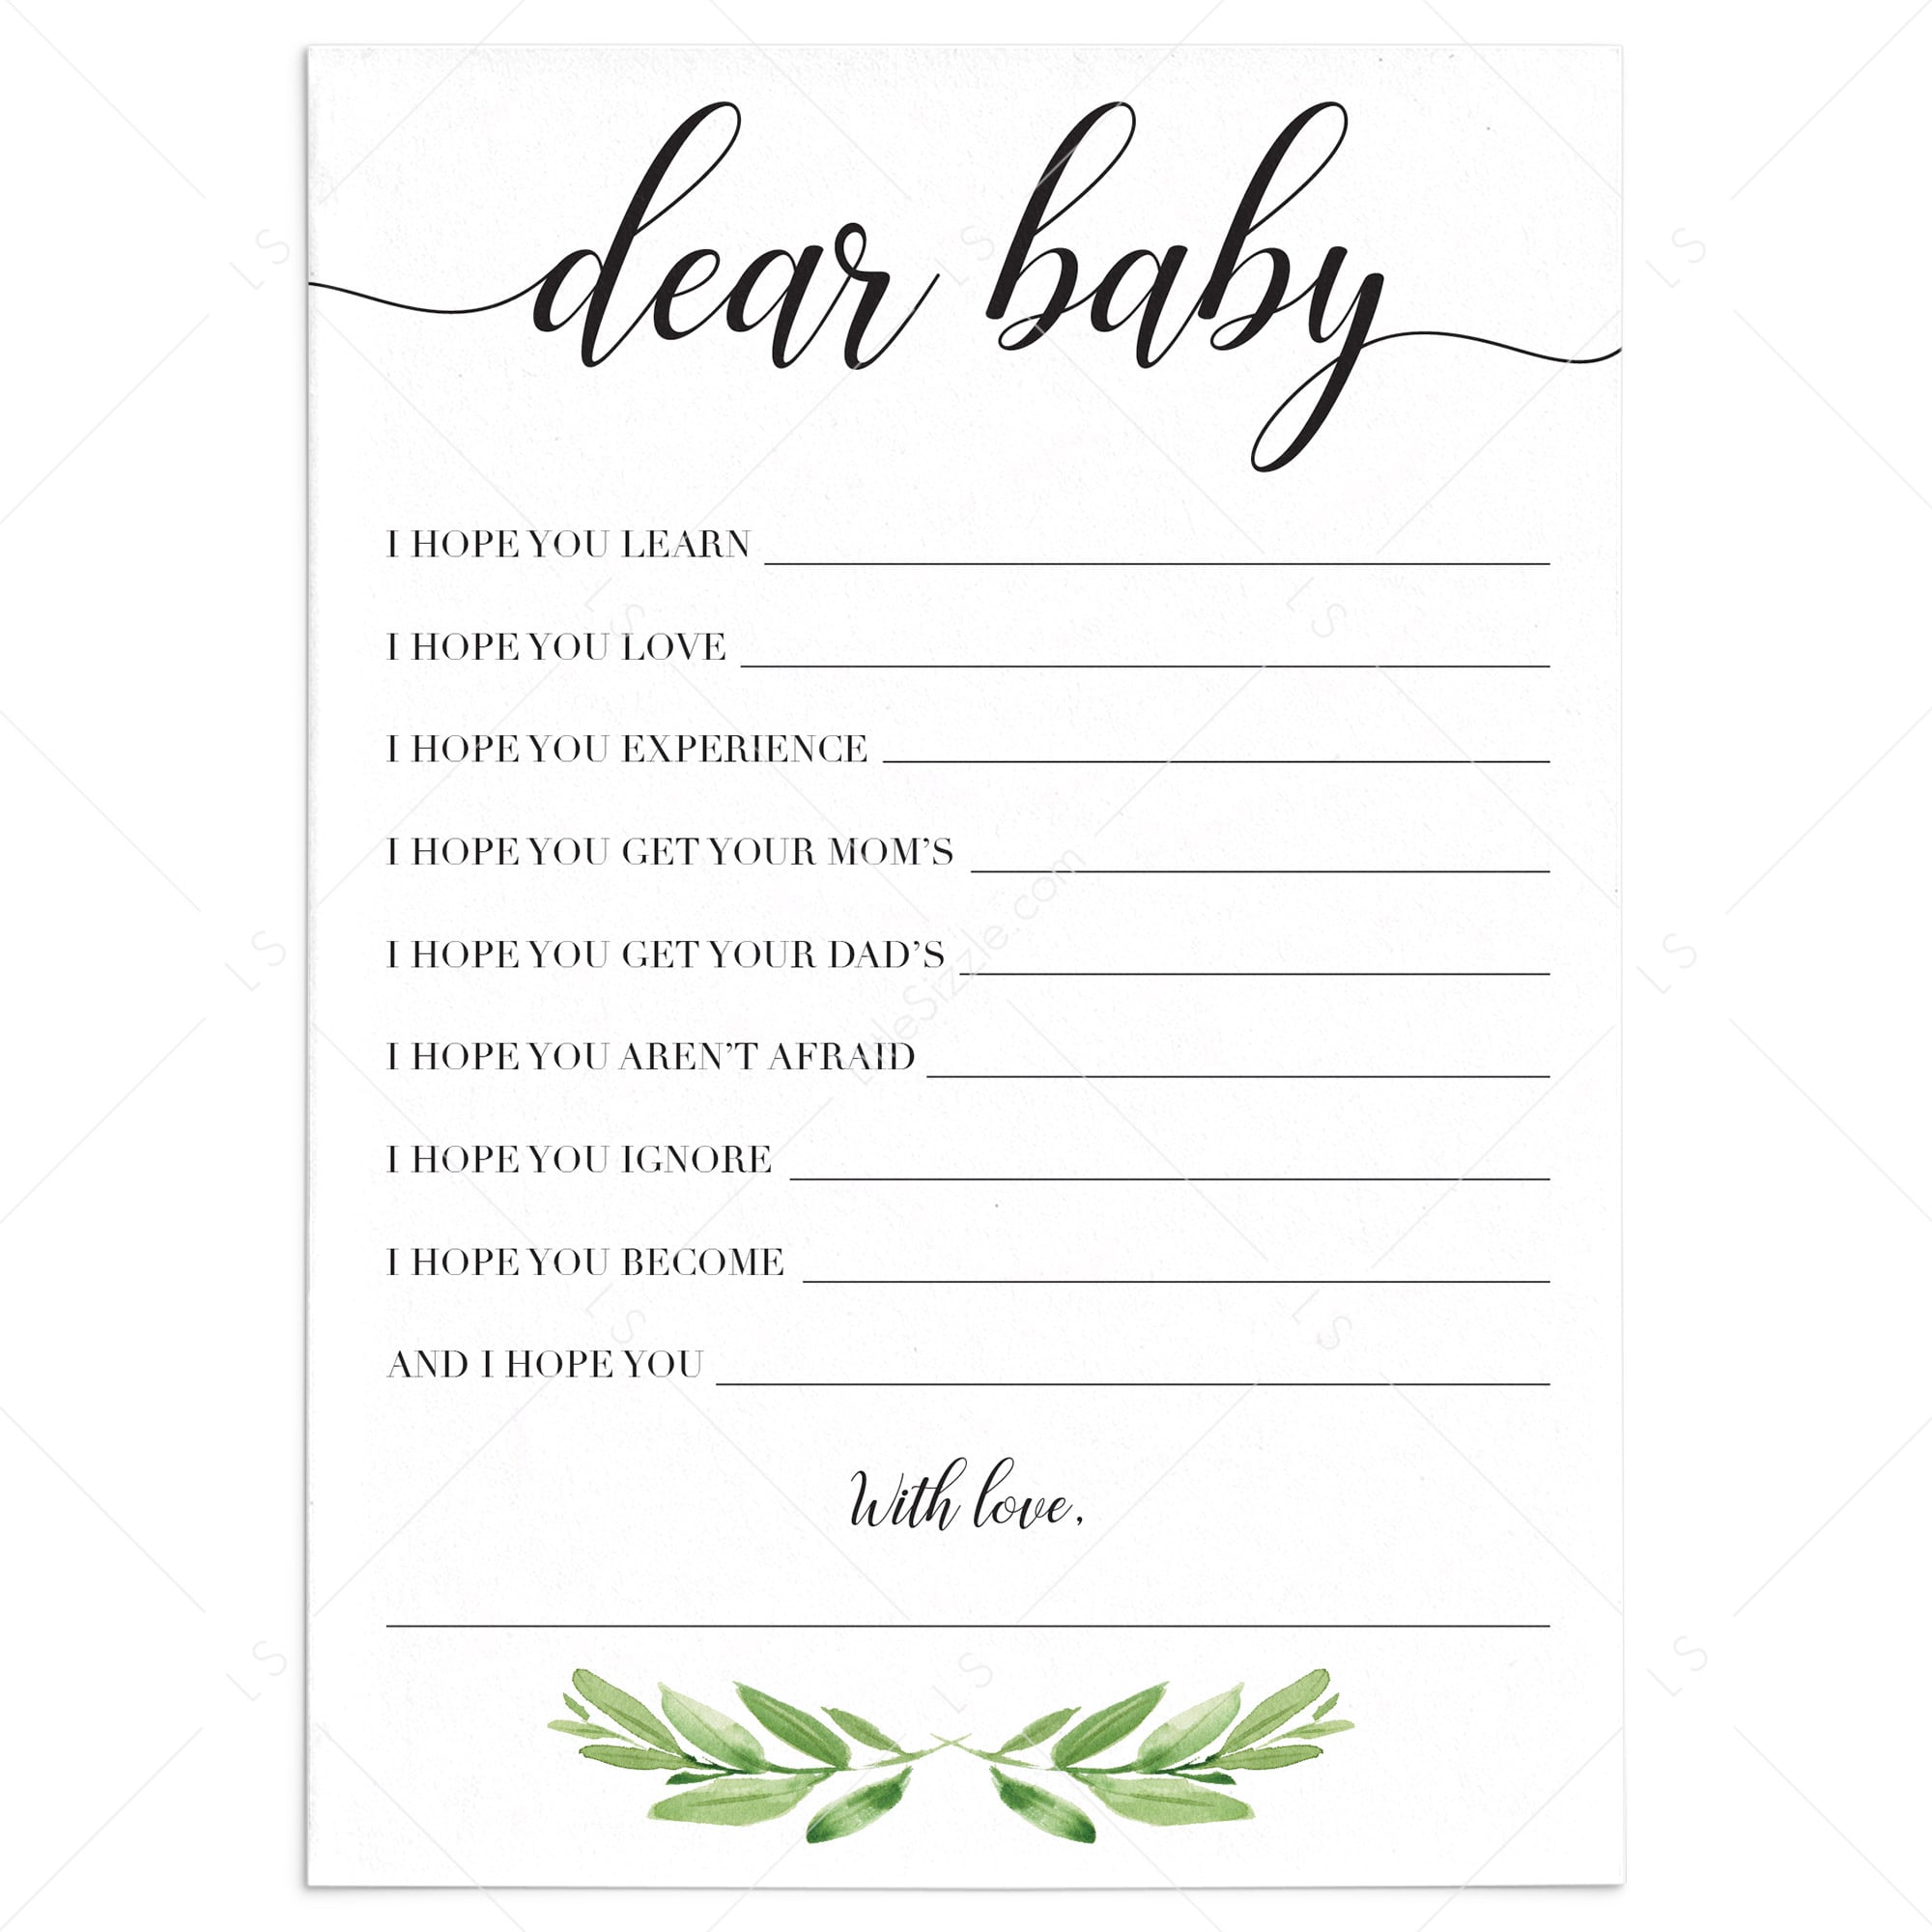 Wishes for Baby Cards for greenery baby shower | Printable & Virtual LittleSizzle